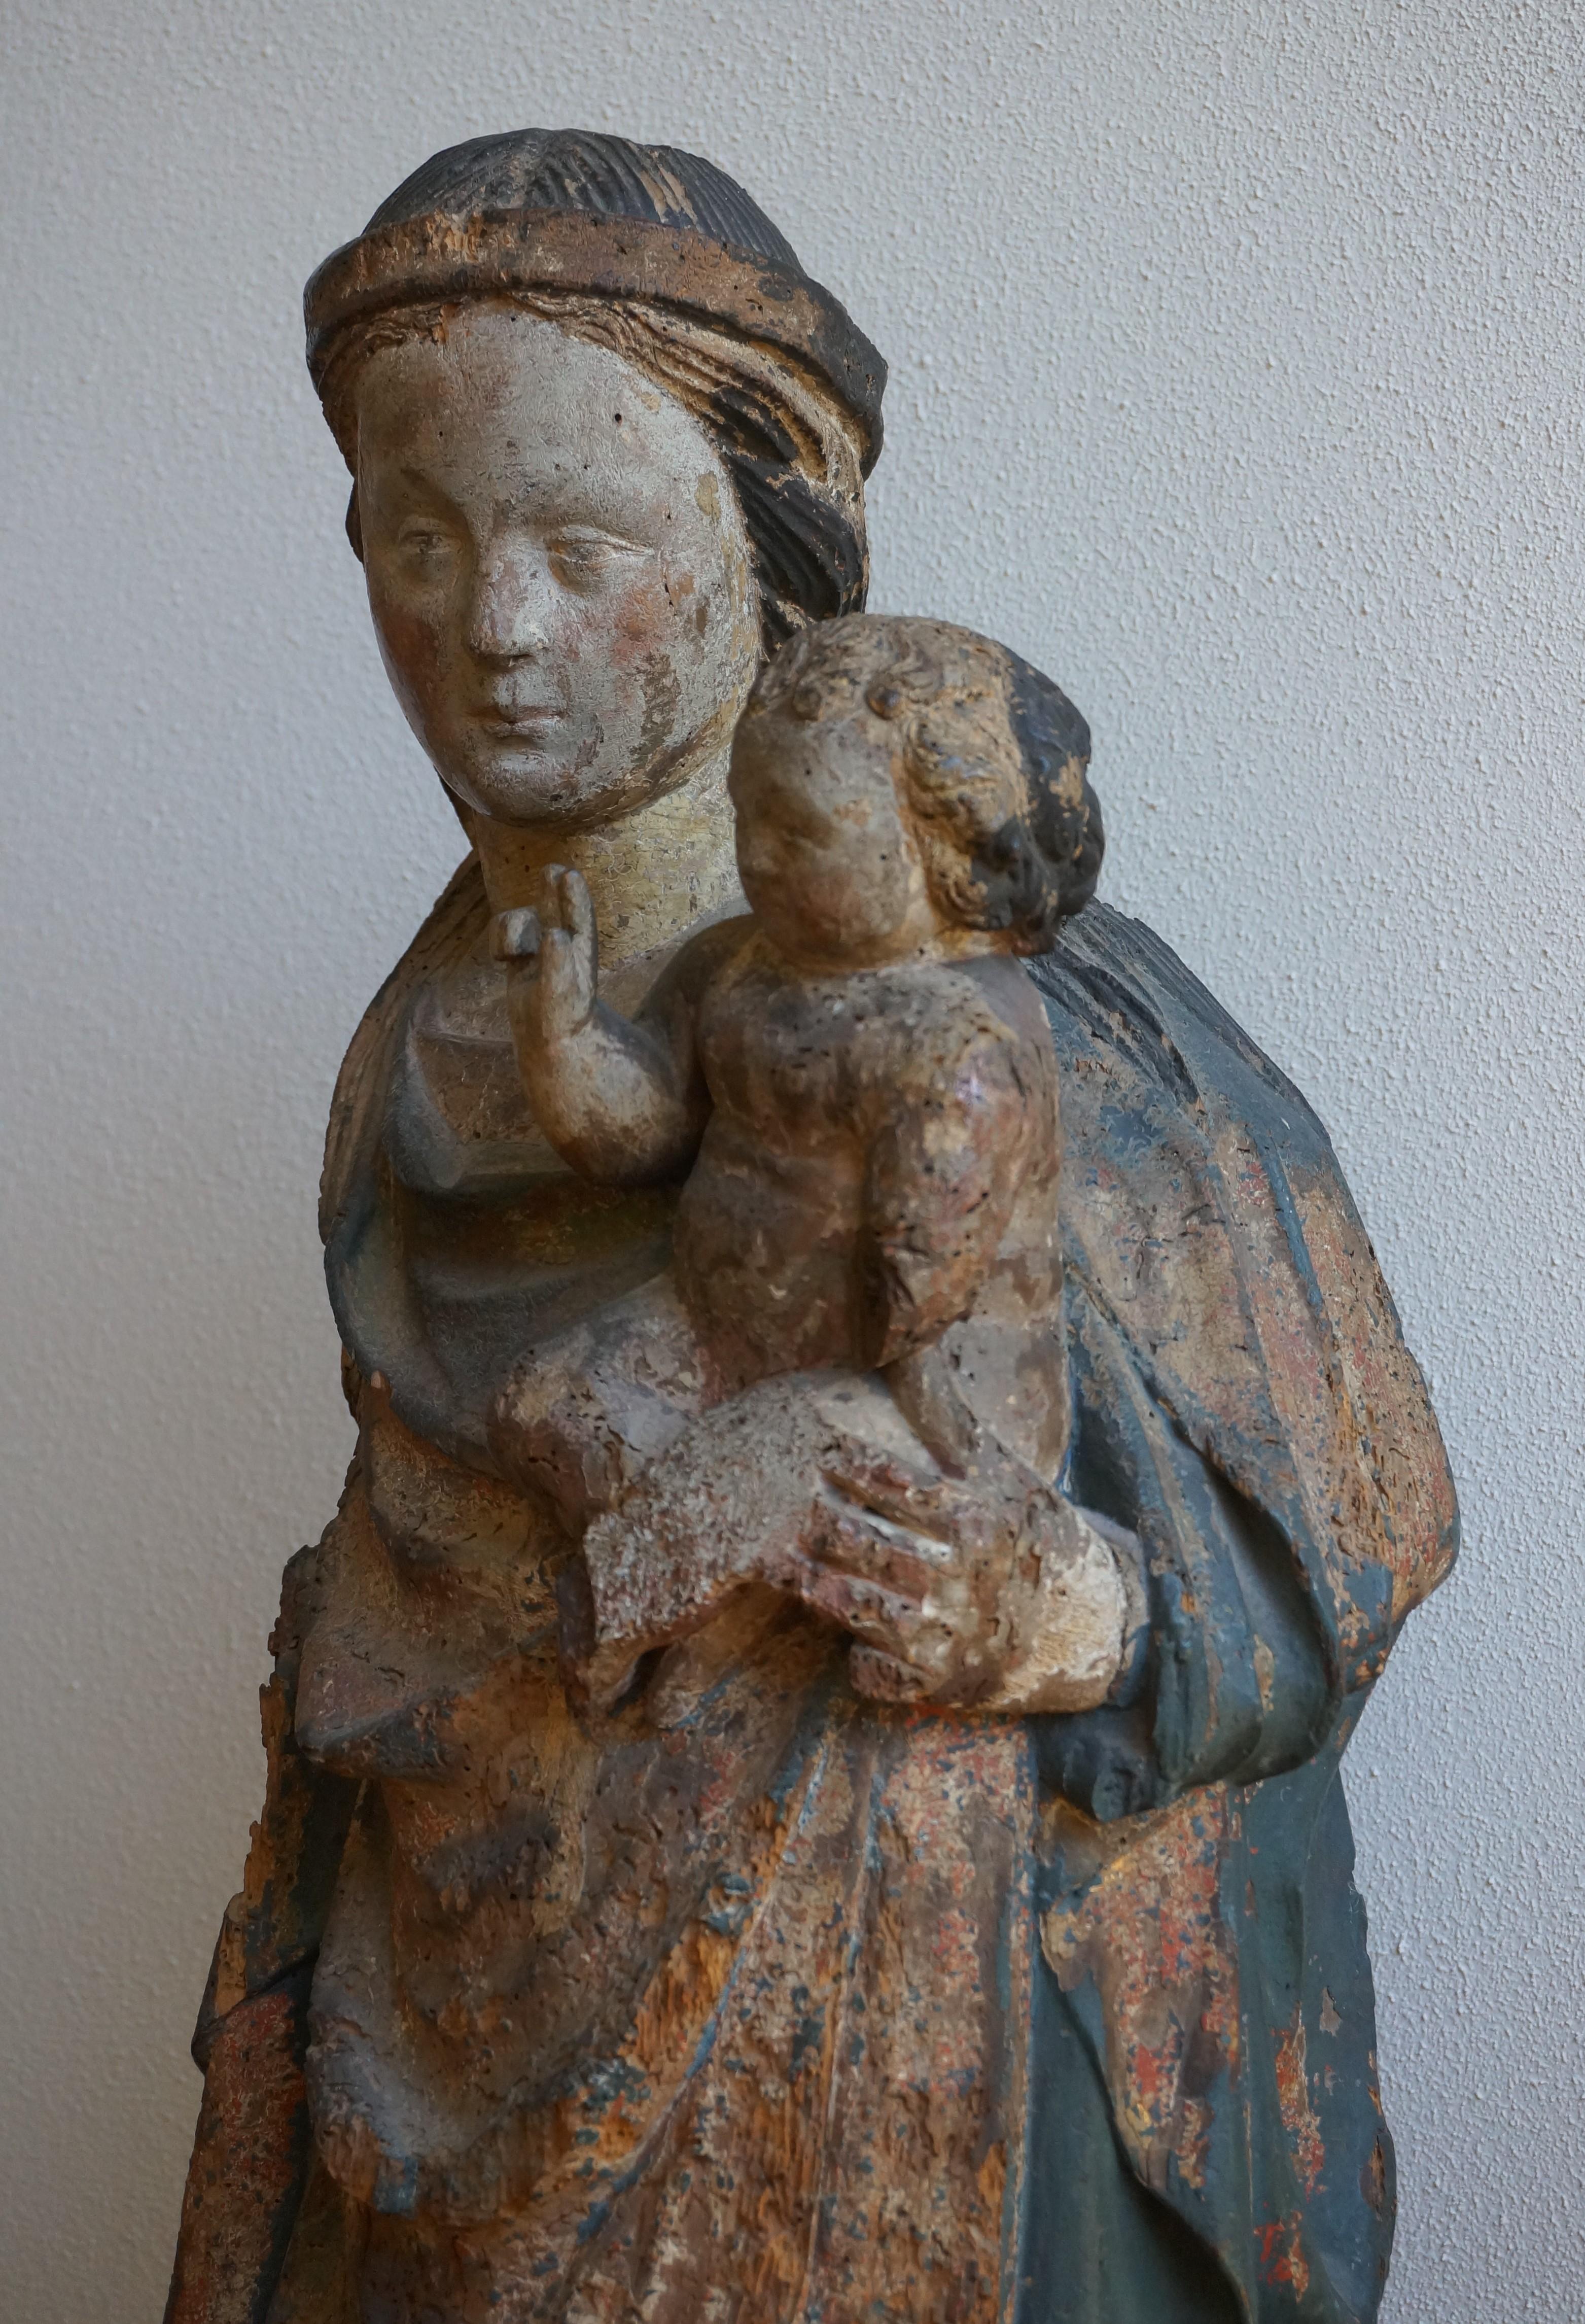 French Large medieval sculpture of the Virgin Mary and Child, France, ca. 1400, Gothic